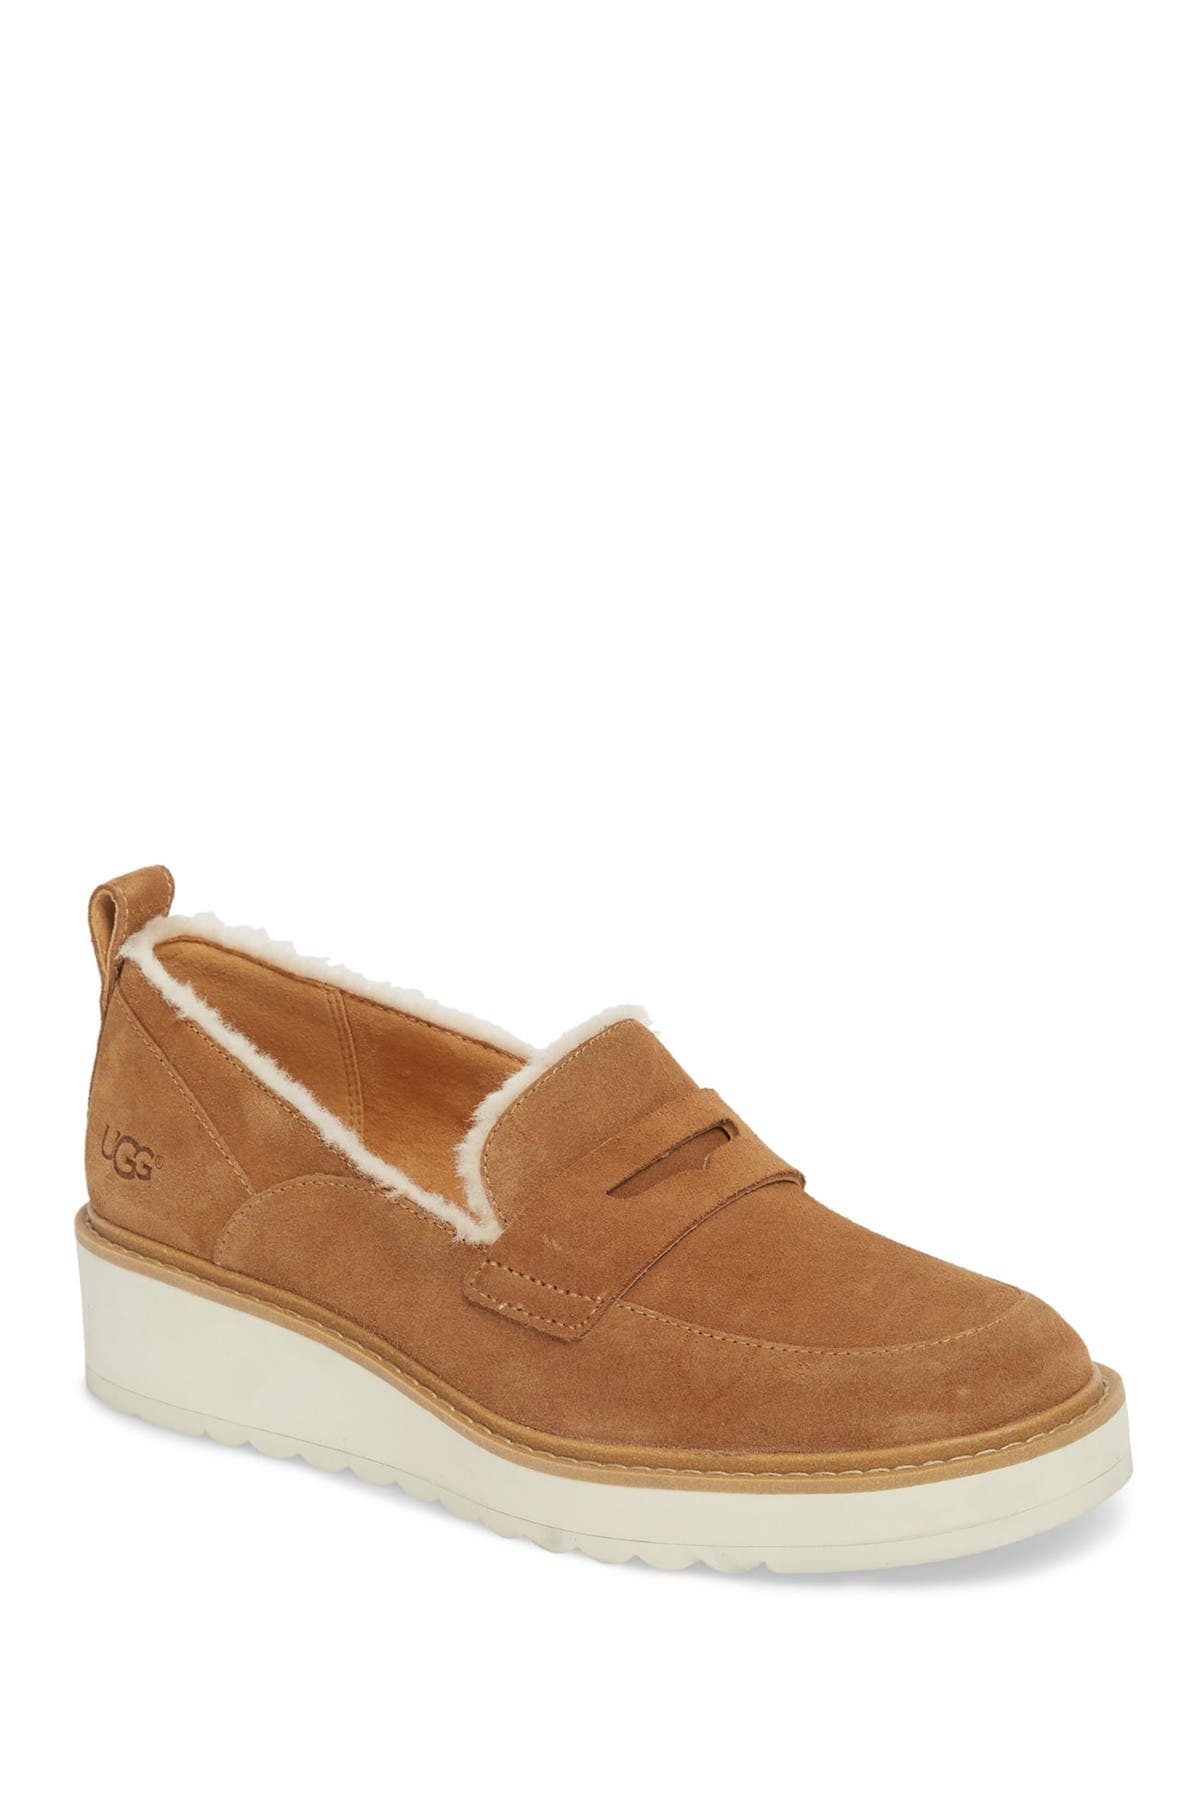 ugg atwater spill seam loafer